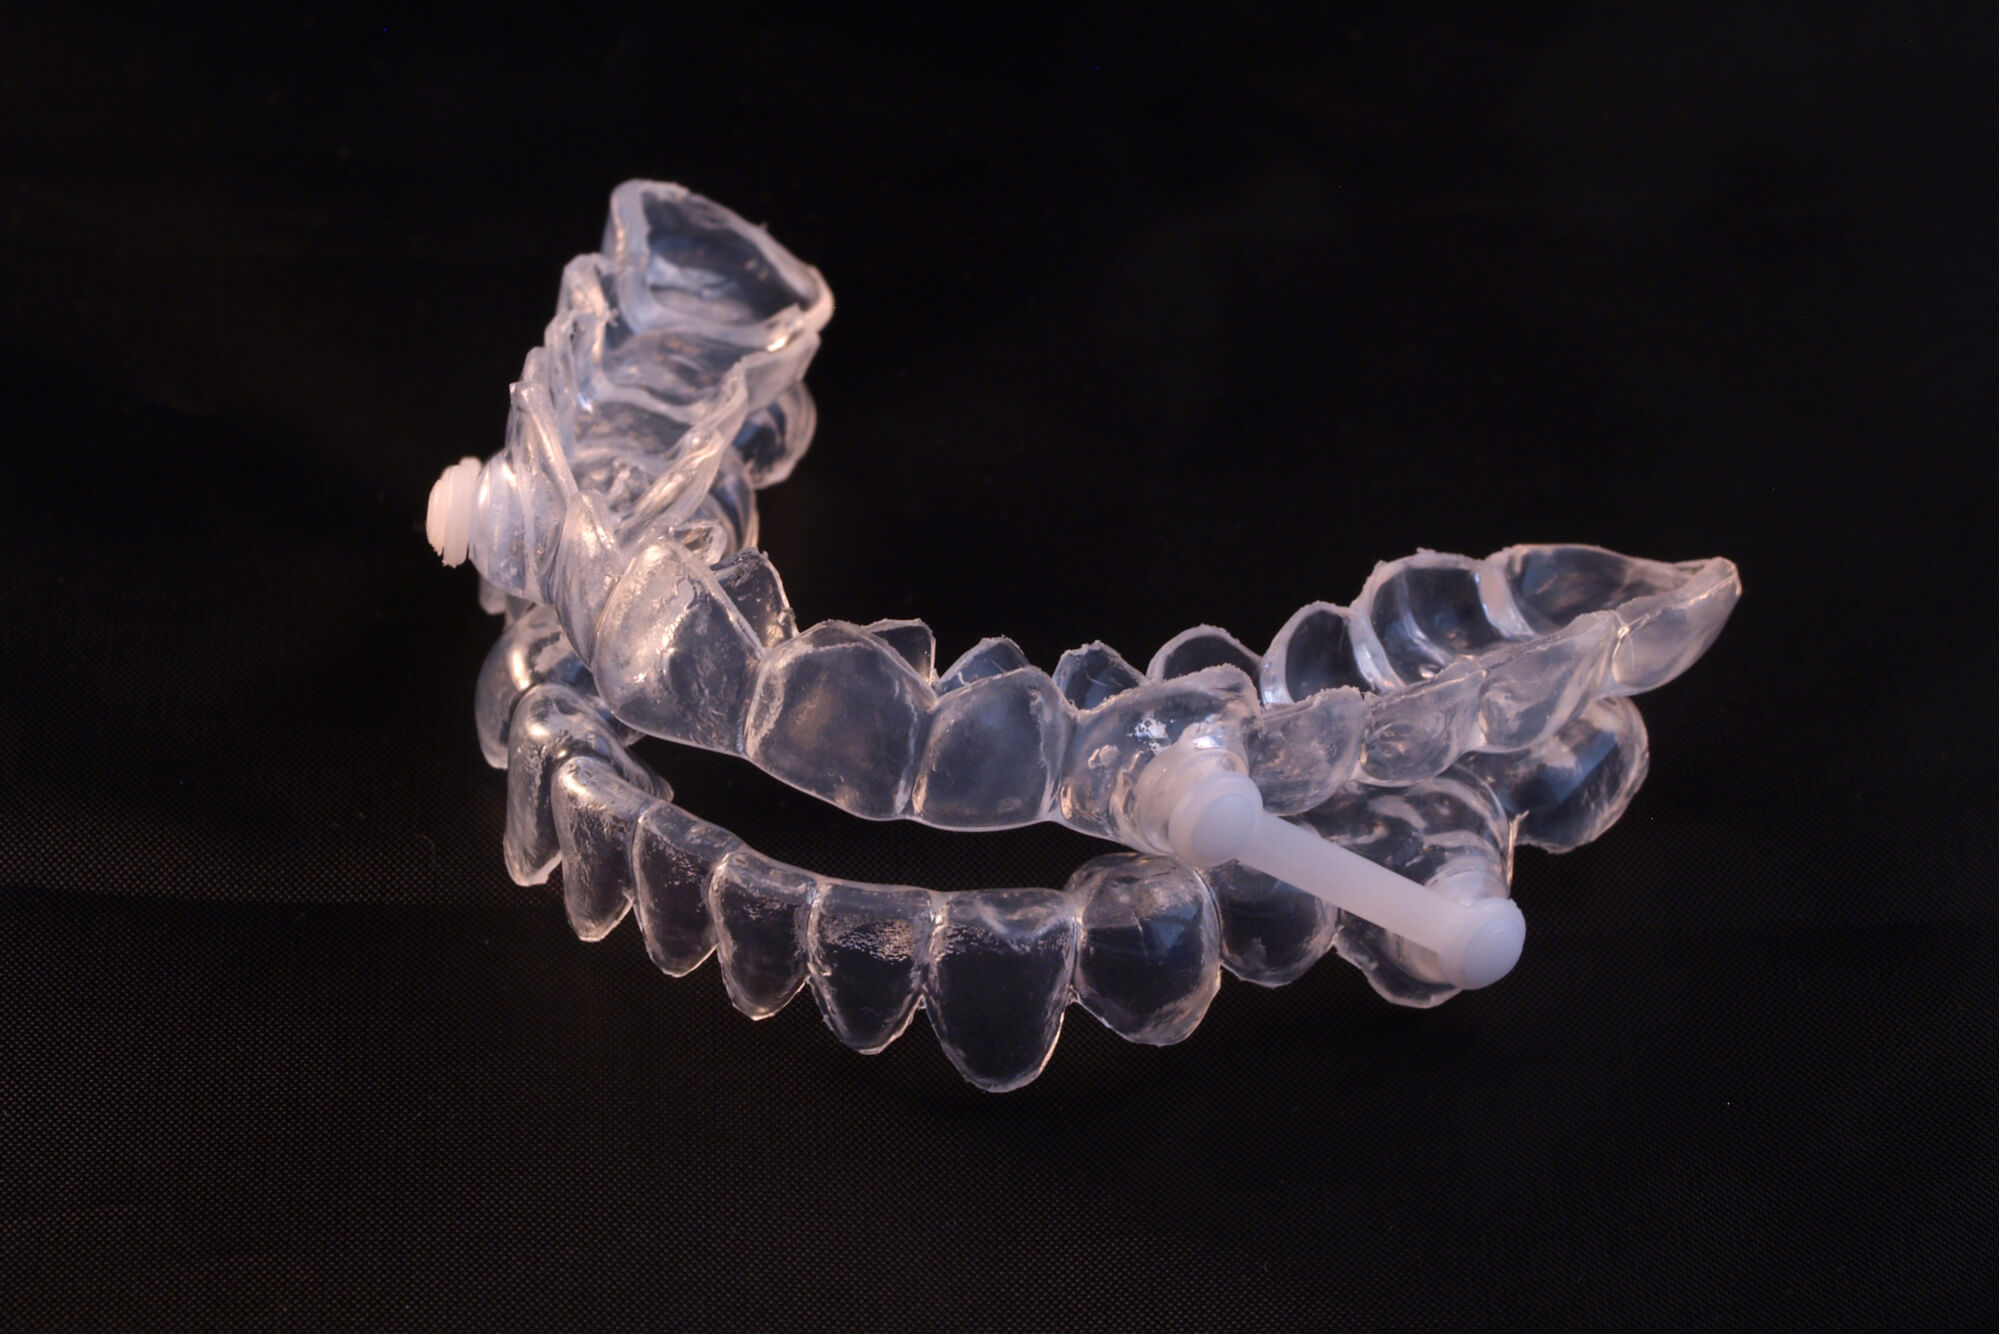 Custom-made oral appliances to stop snoring and sleep apnea in Tennessee.